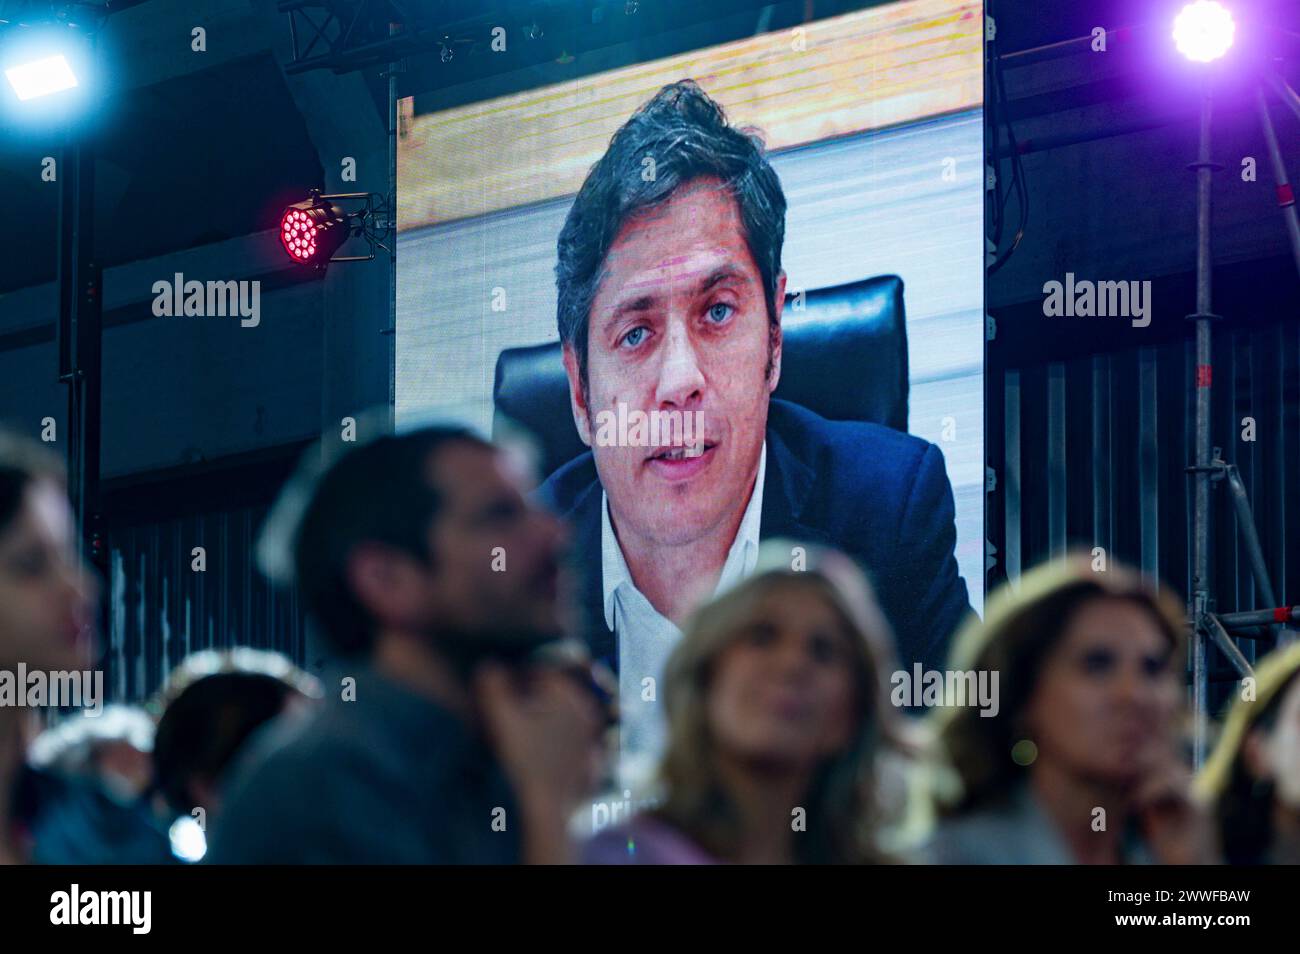 European Election 2024: Assembly of the Spanish left-wing political party Sumar A video message by Axel Kicillof, Argentinian politician and governor of the province of Buenos Aires, seen during the assembly of the Spanish left-wing political party Sumar celebrated at the La Nave de Villaverde events center in Madrid. Madrid La Nave de Villaverde Madrid Spain Copyright: xAlbertoxGardinx AGardin 20240324 politics Asamblea Sumar 0059 Stock Photo